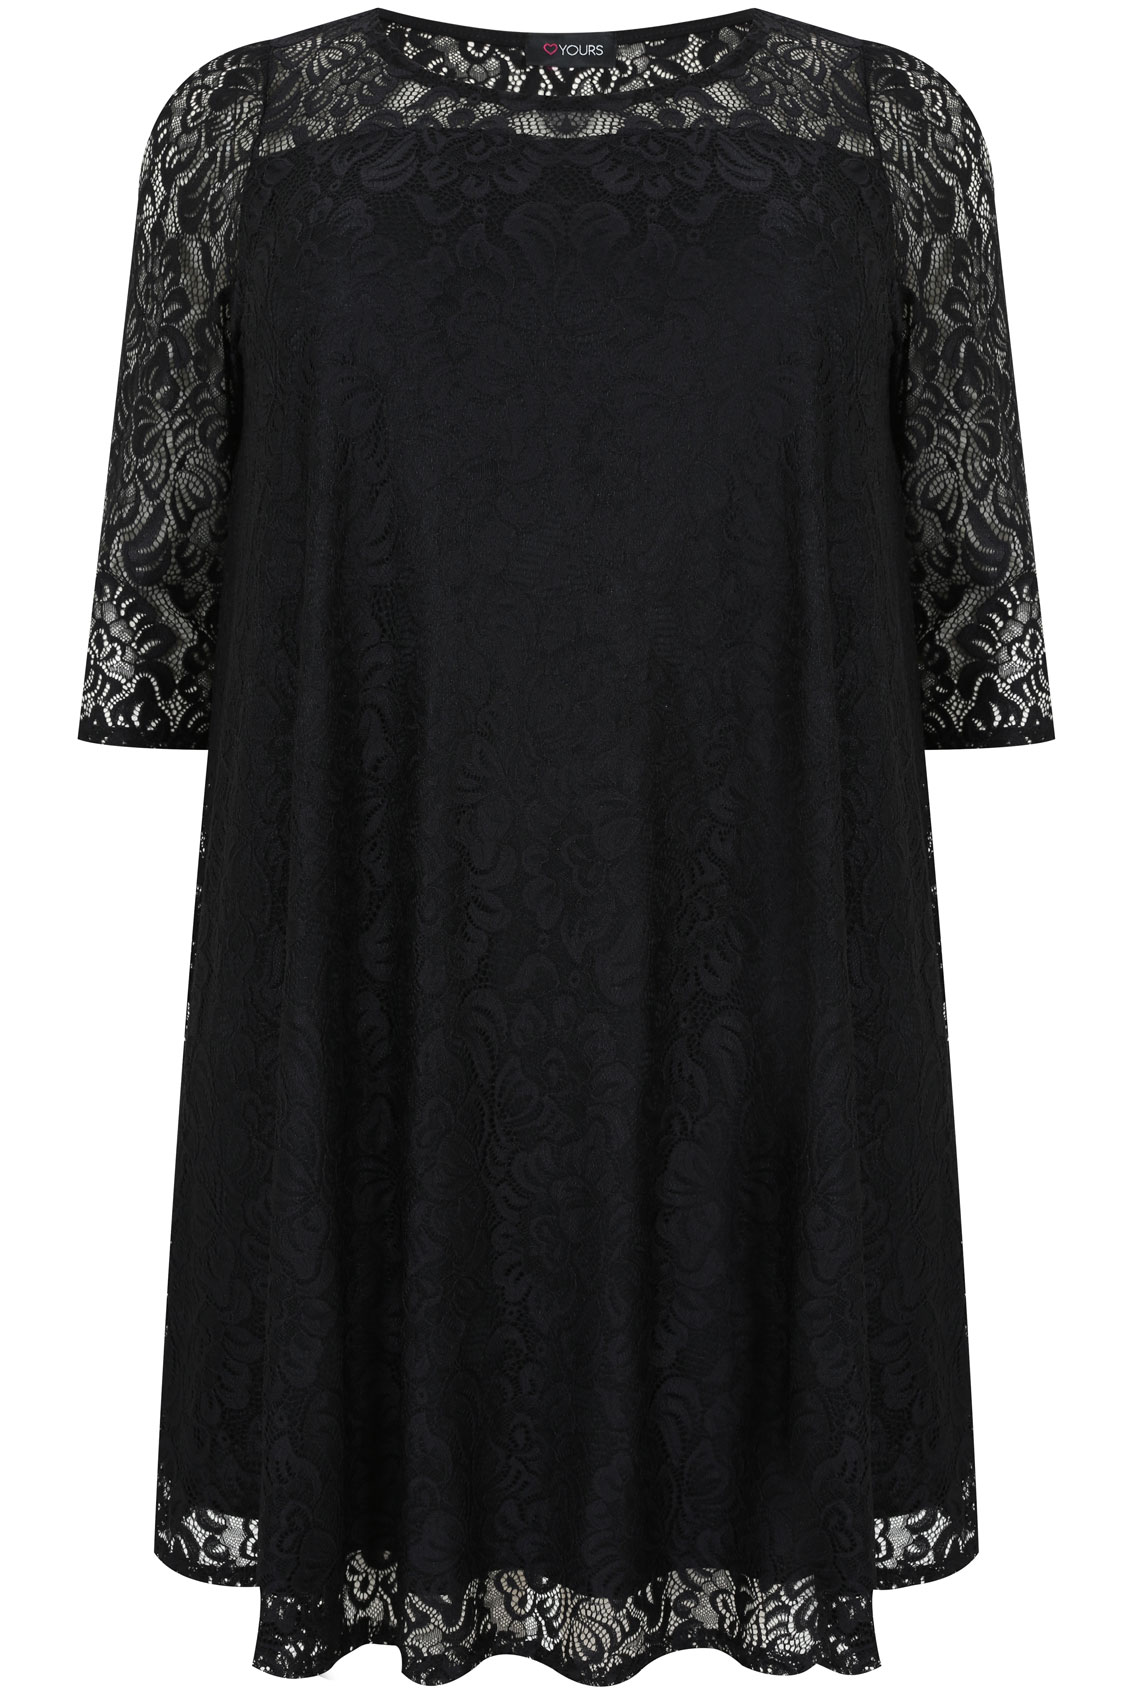 Black Lace Sleeved Swing Dress Plus Size 14 to 36